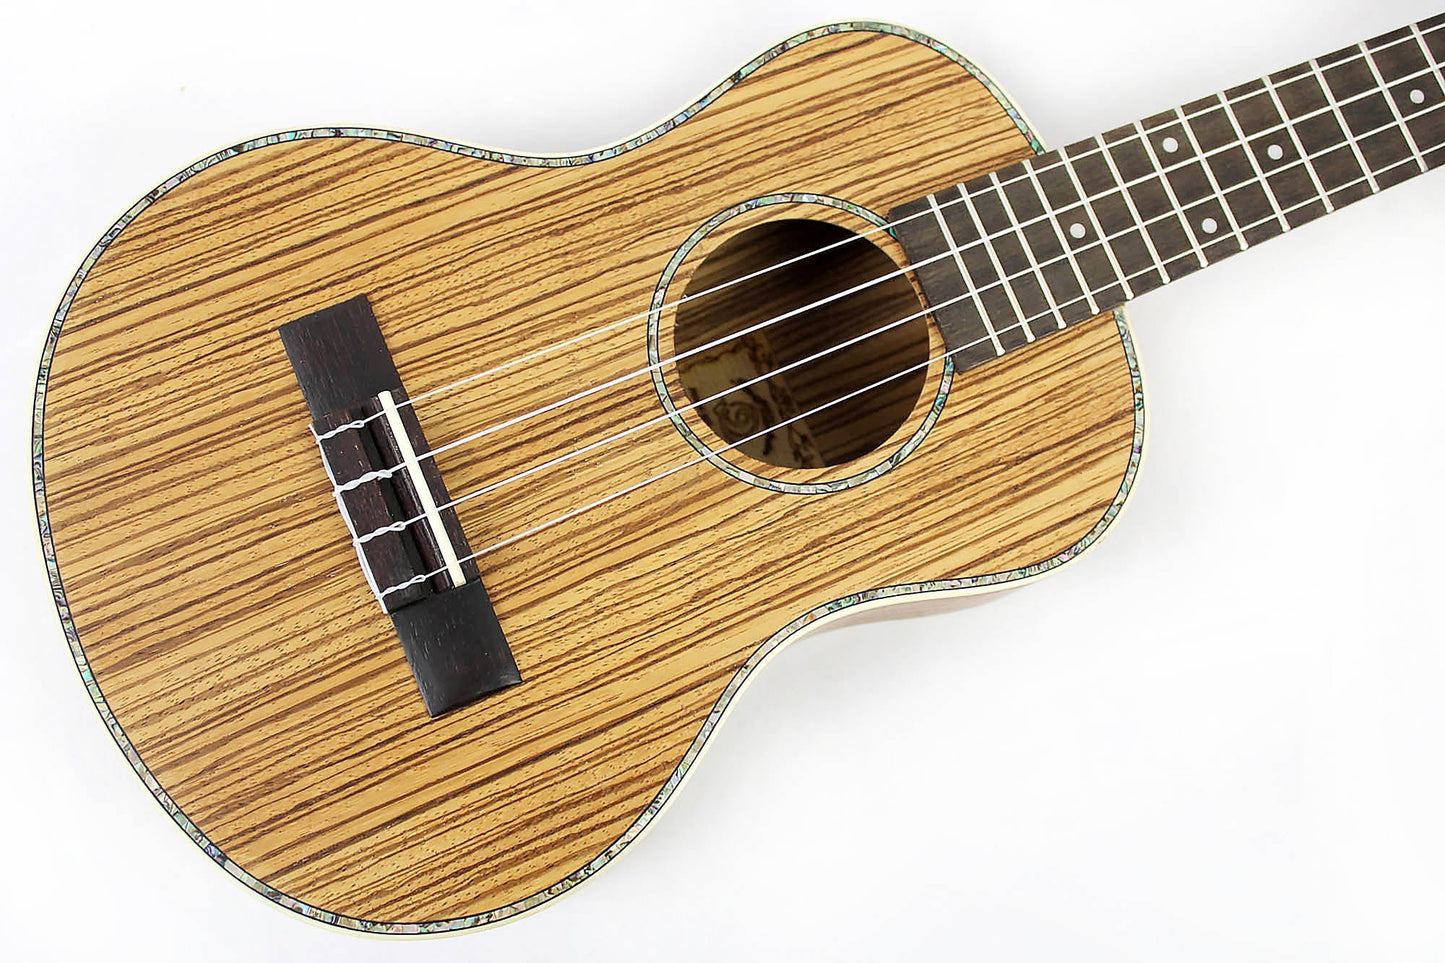 This is the front of the top and neck of a Snail SNAILZEBUKT Zebrawood Tenor Ukulele.